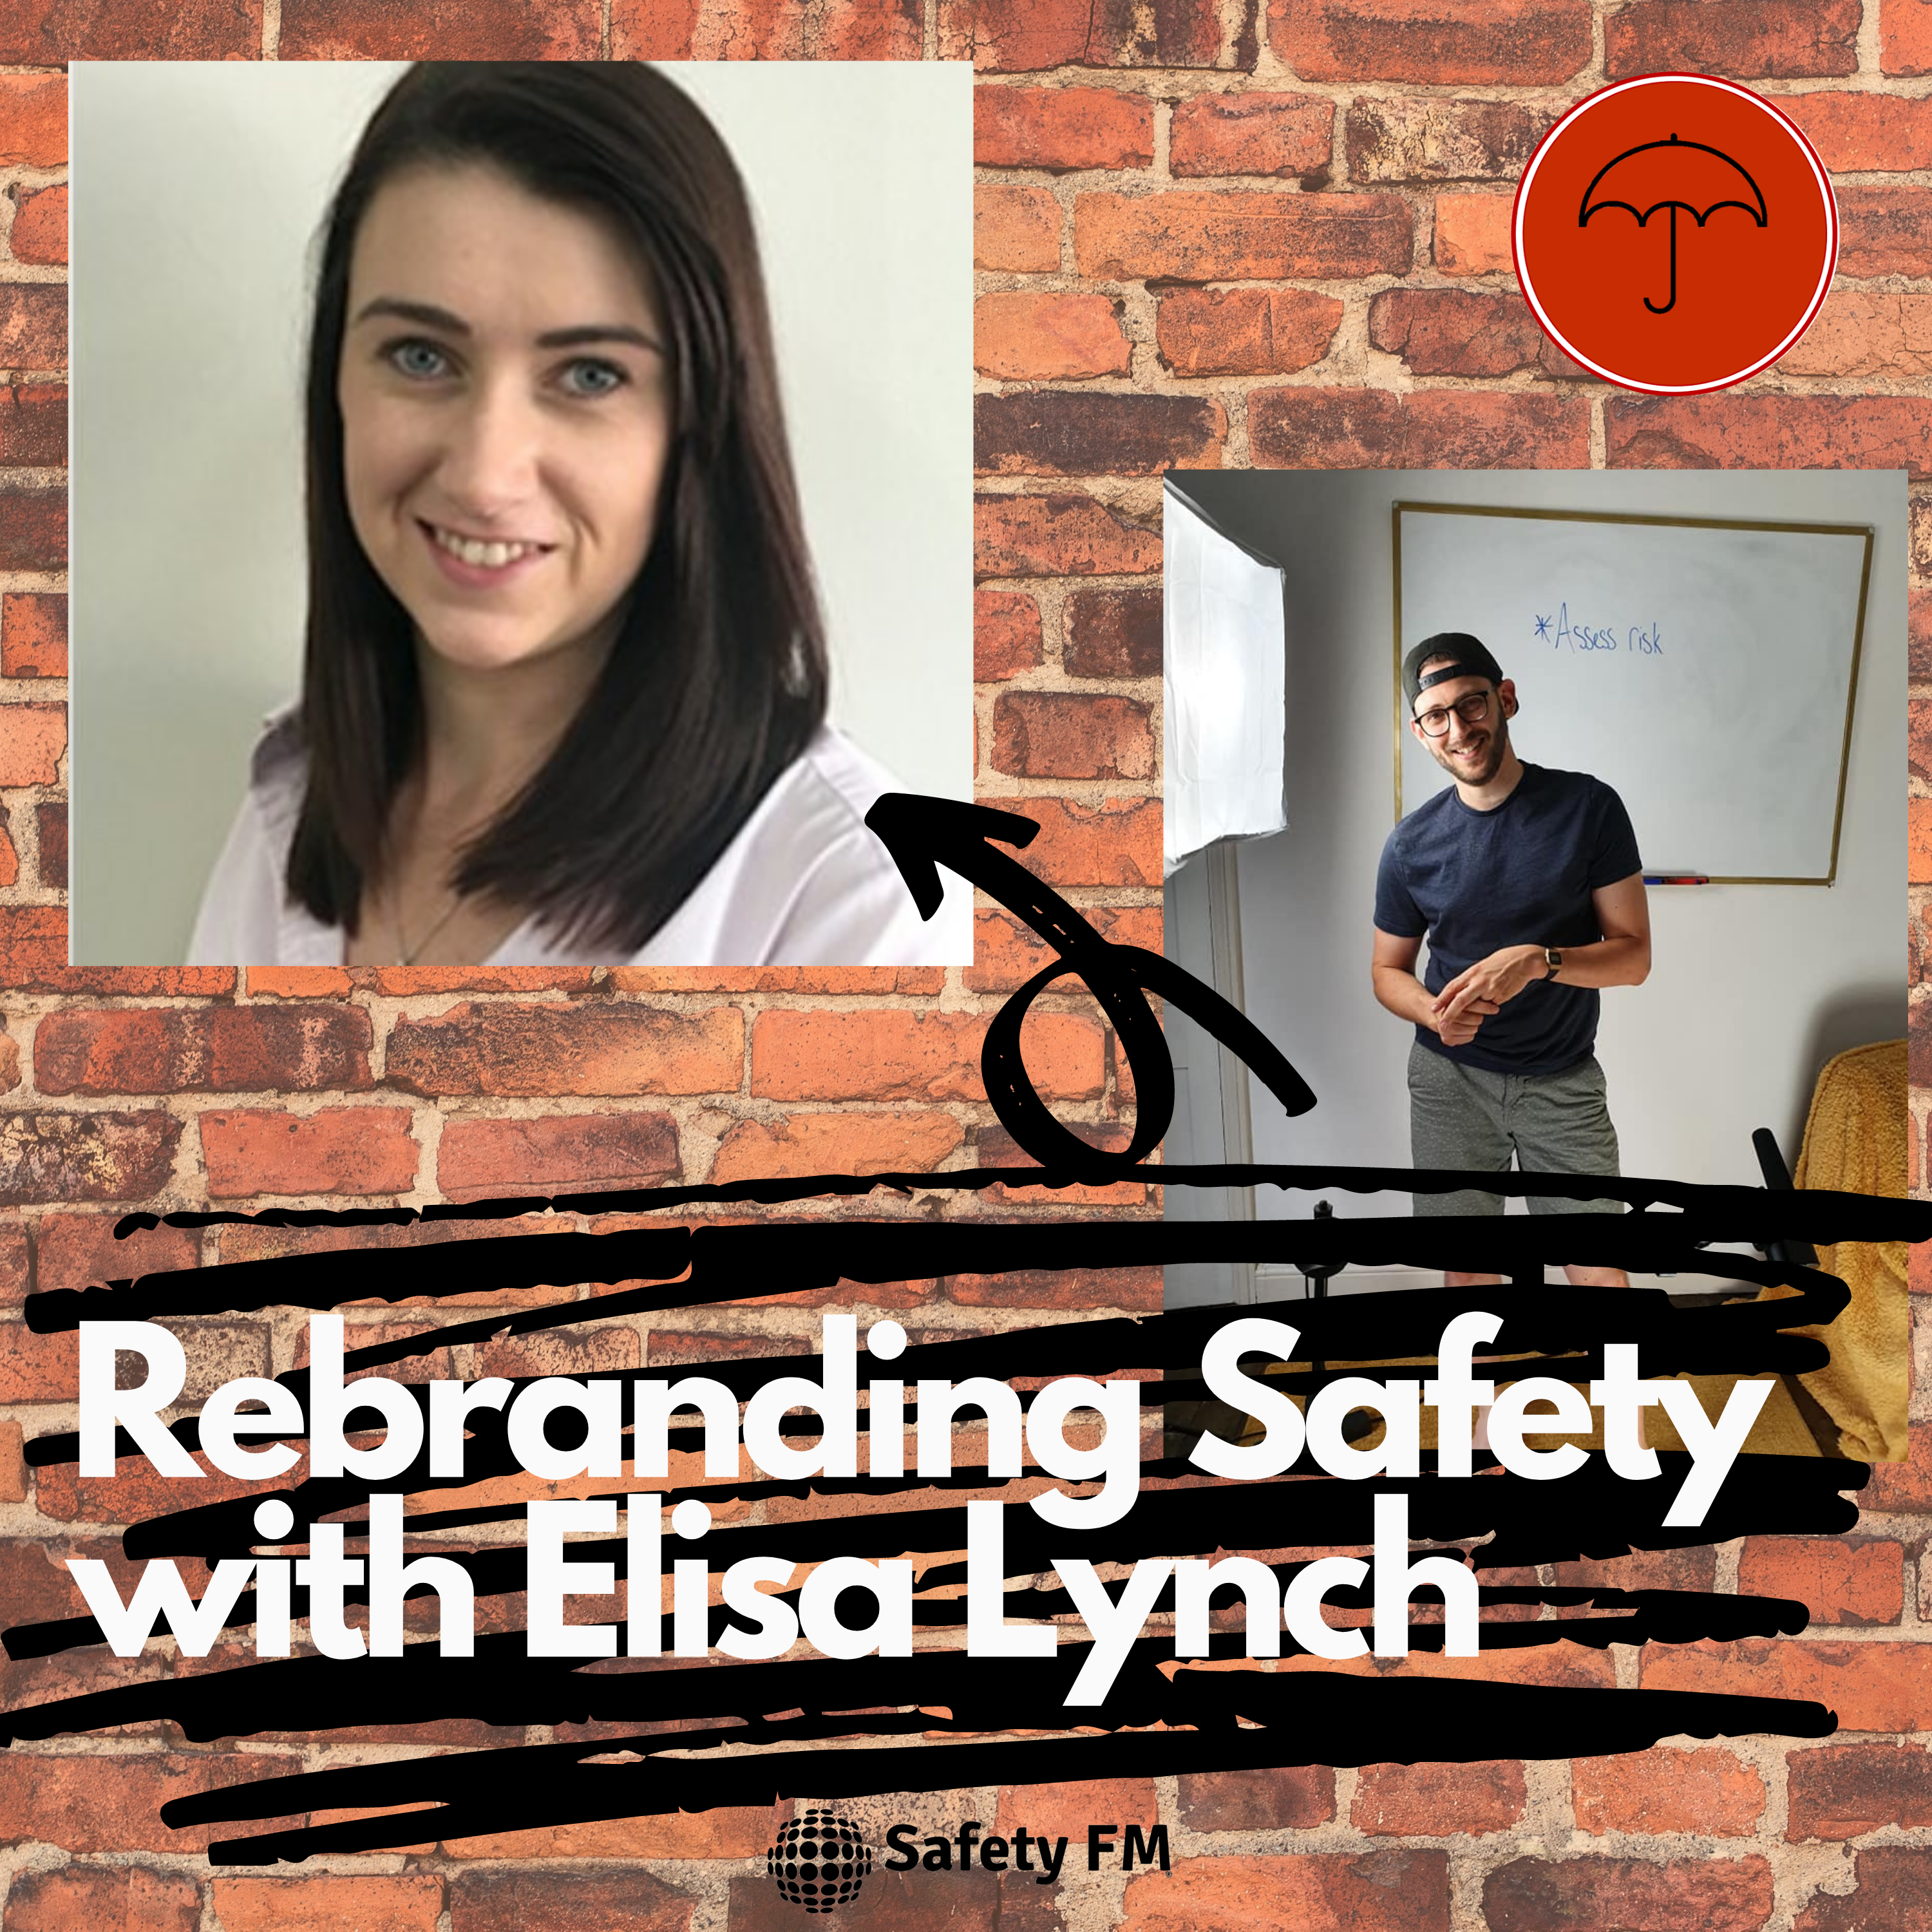 Rebranding Safety with Elisa Lynch - ”I don’t know..... I read a blog about it!”